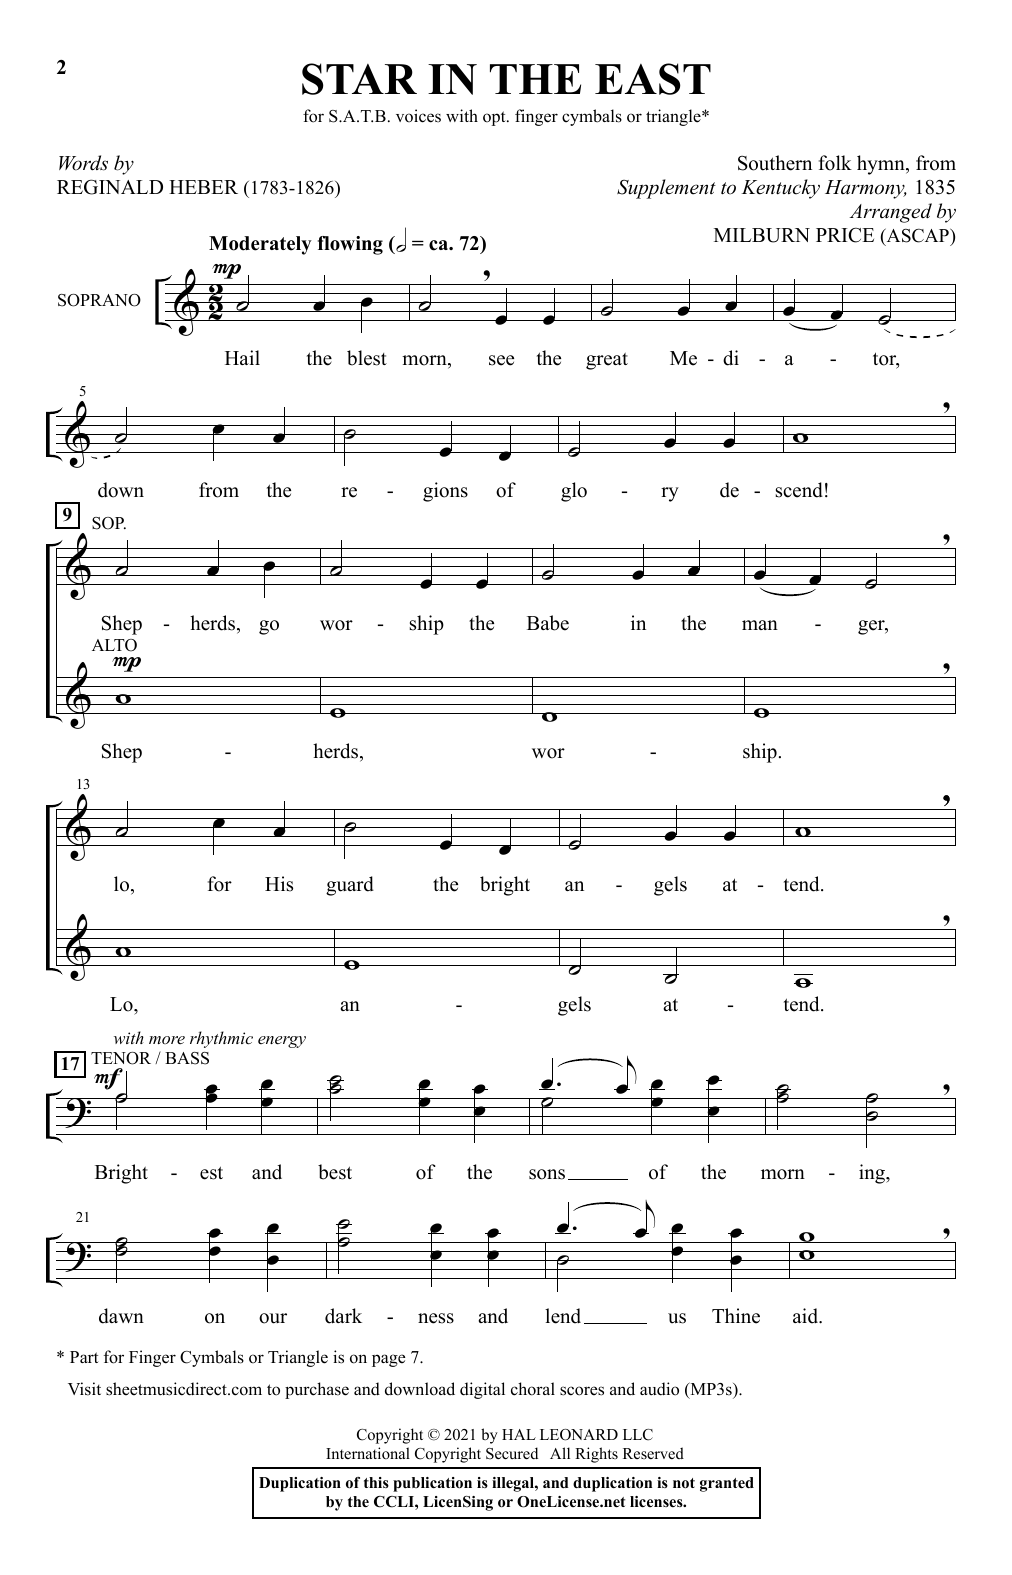 Download Southern Folk Hymn Star In The East (arr. Milburn Price) Sheet Music